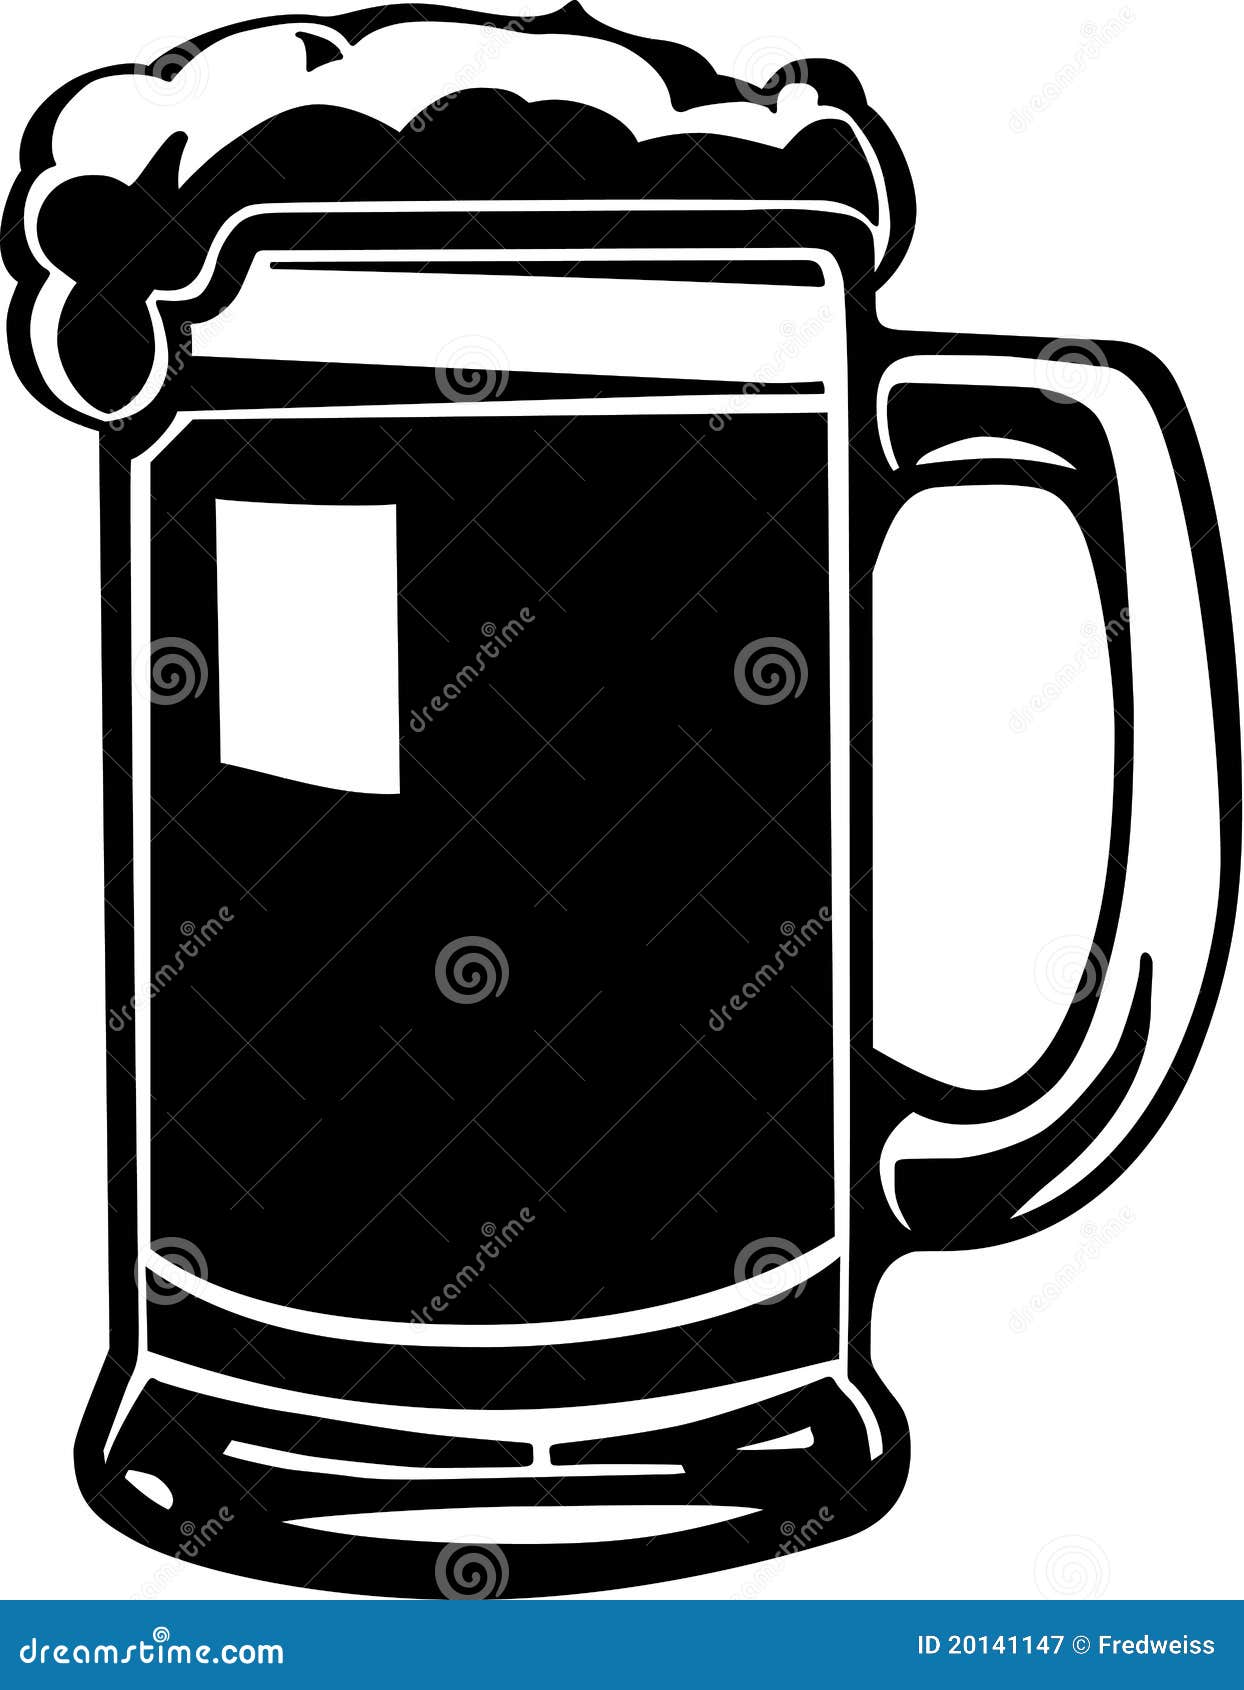 beer can clipart free - photo #44